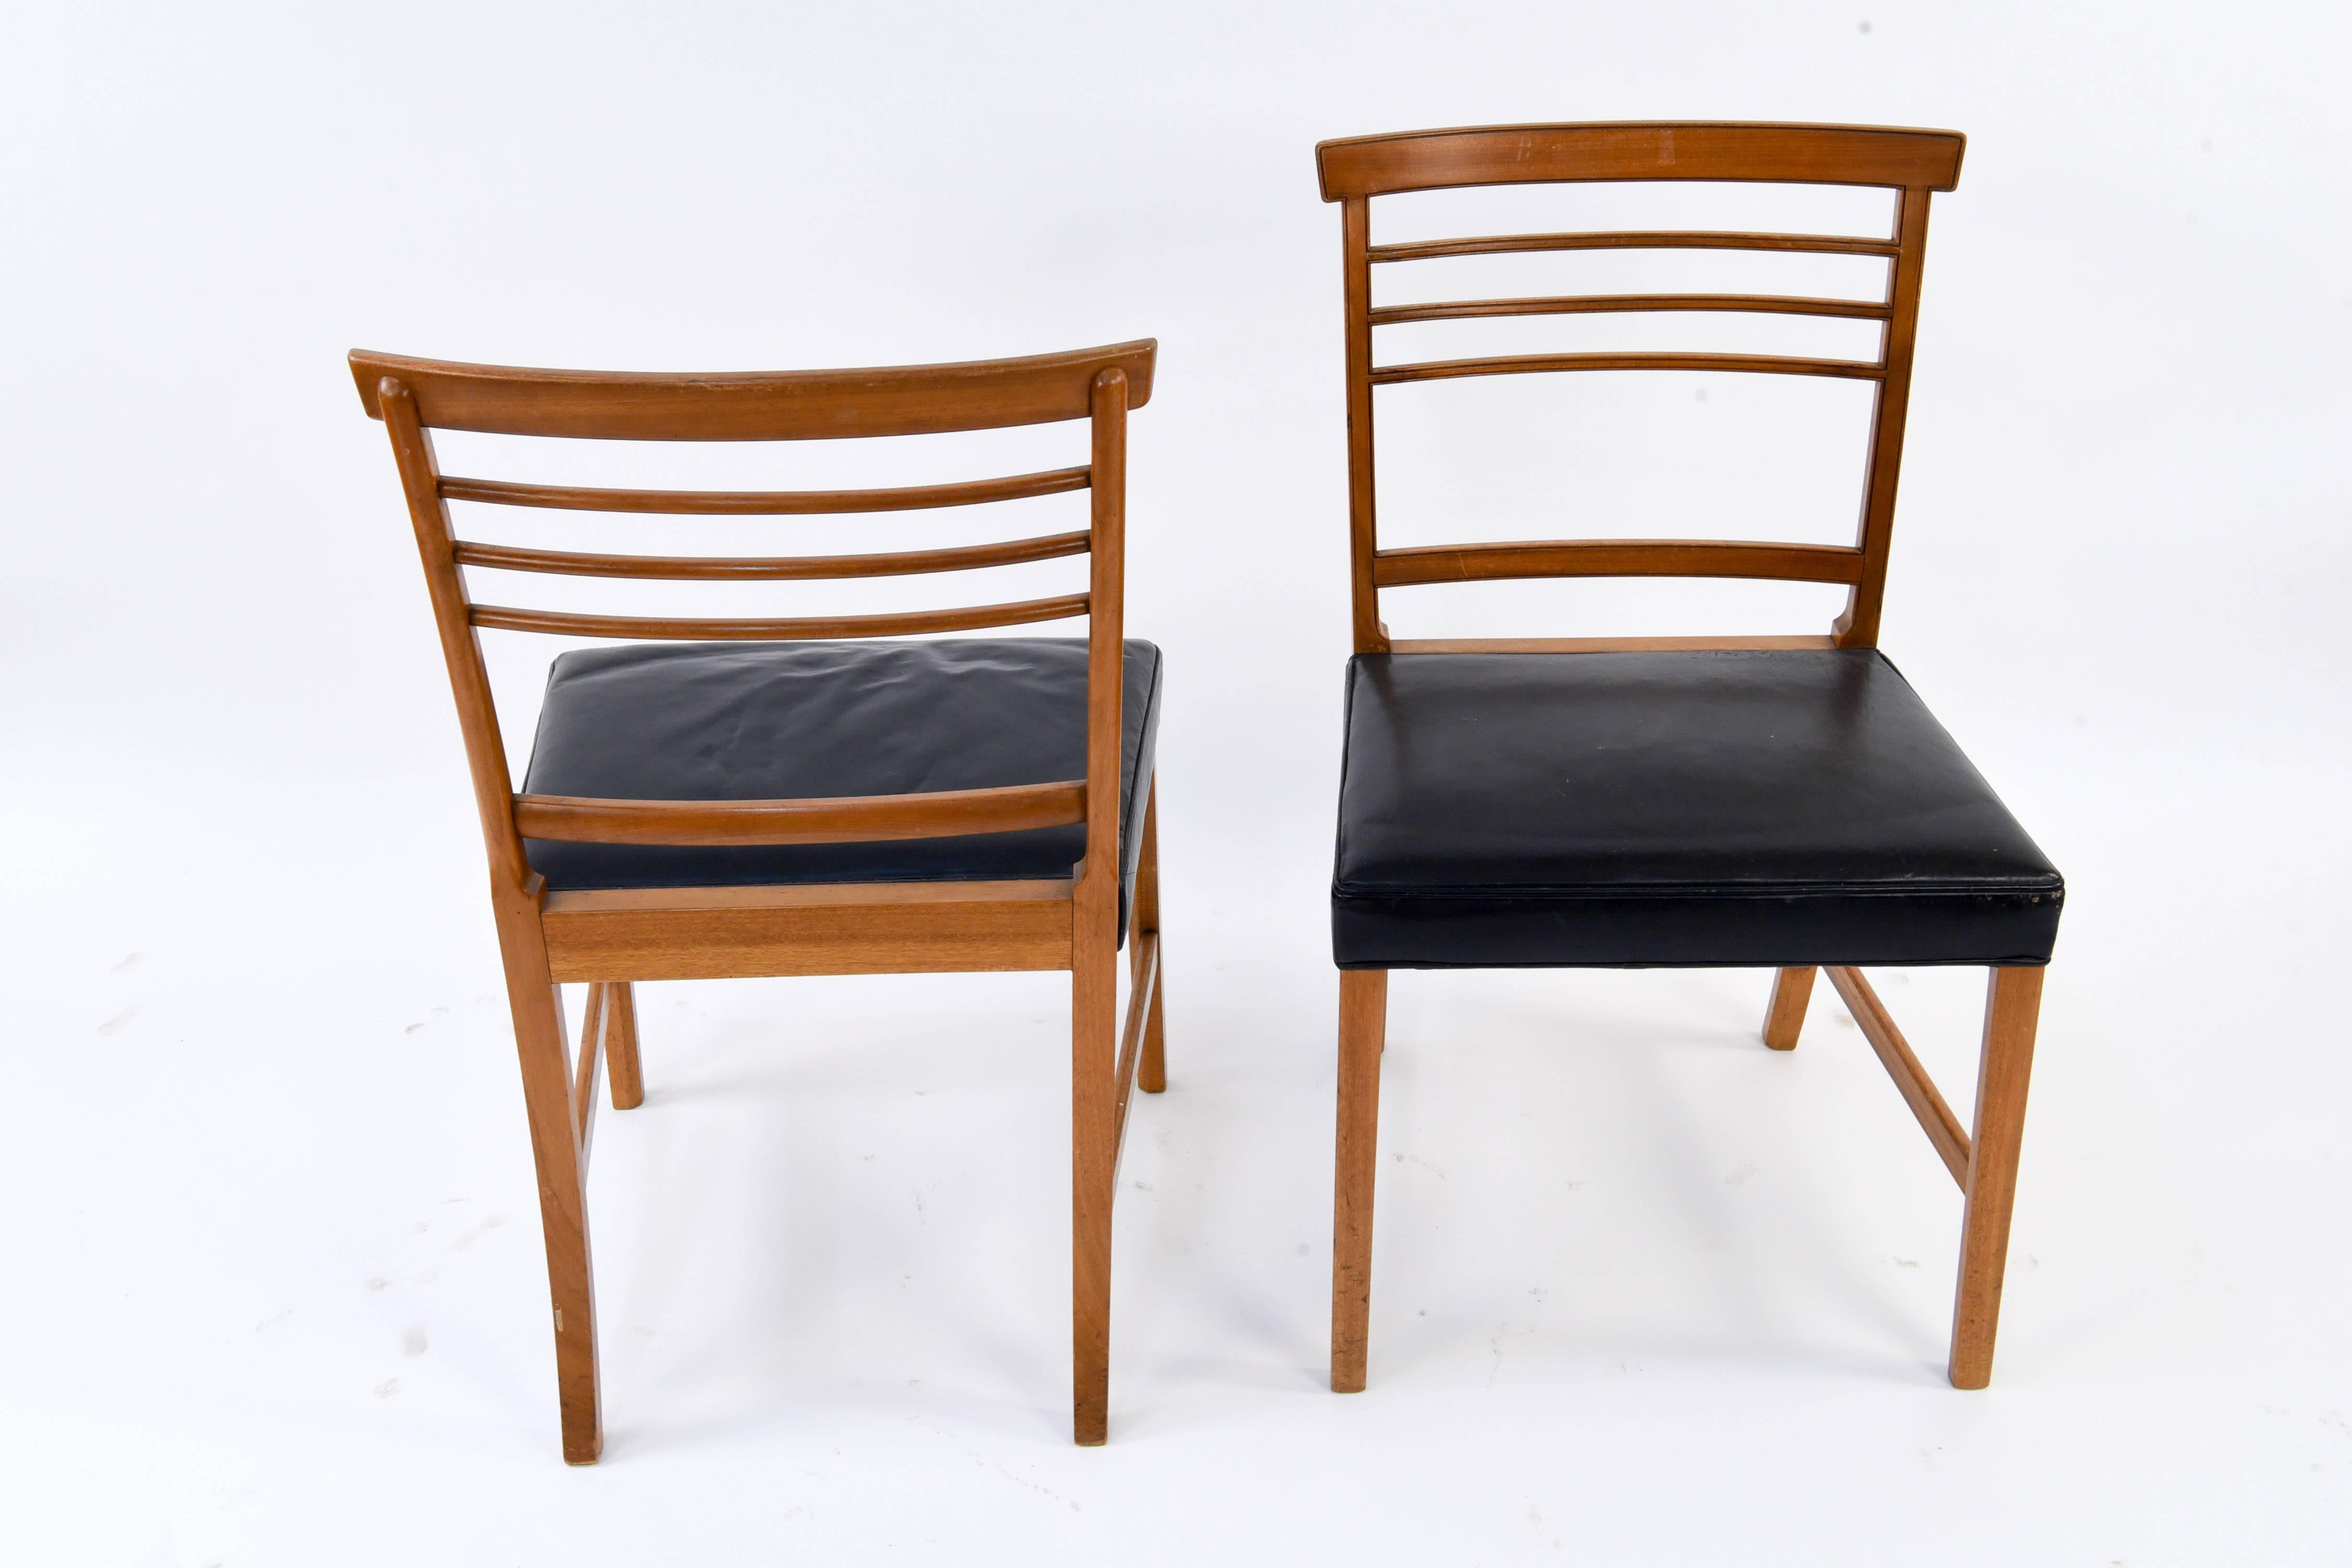 This is an incredible, large set of ten dining or side chairs. Designed by Ole Wanscher for AJ Iversen, circa 1950s. A great example of Danish midcentury design, and a great opportunity to get a large amount of matching chairs to fit around your